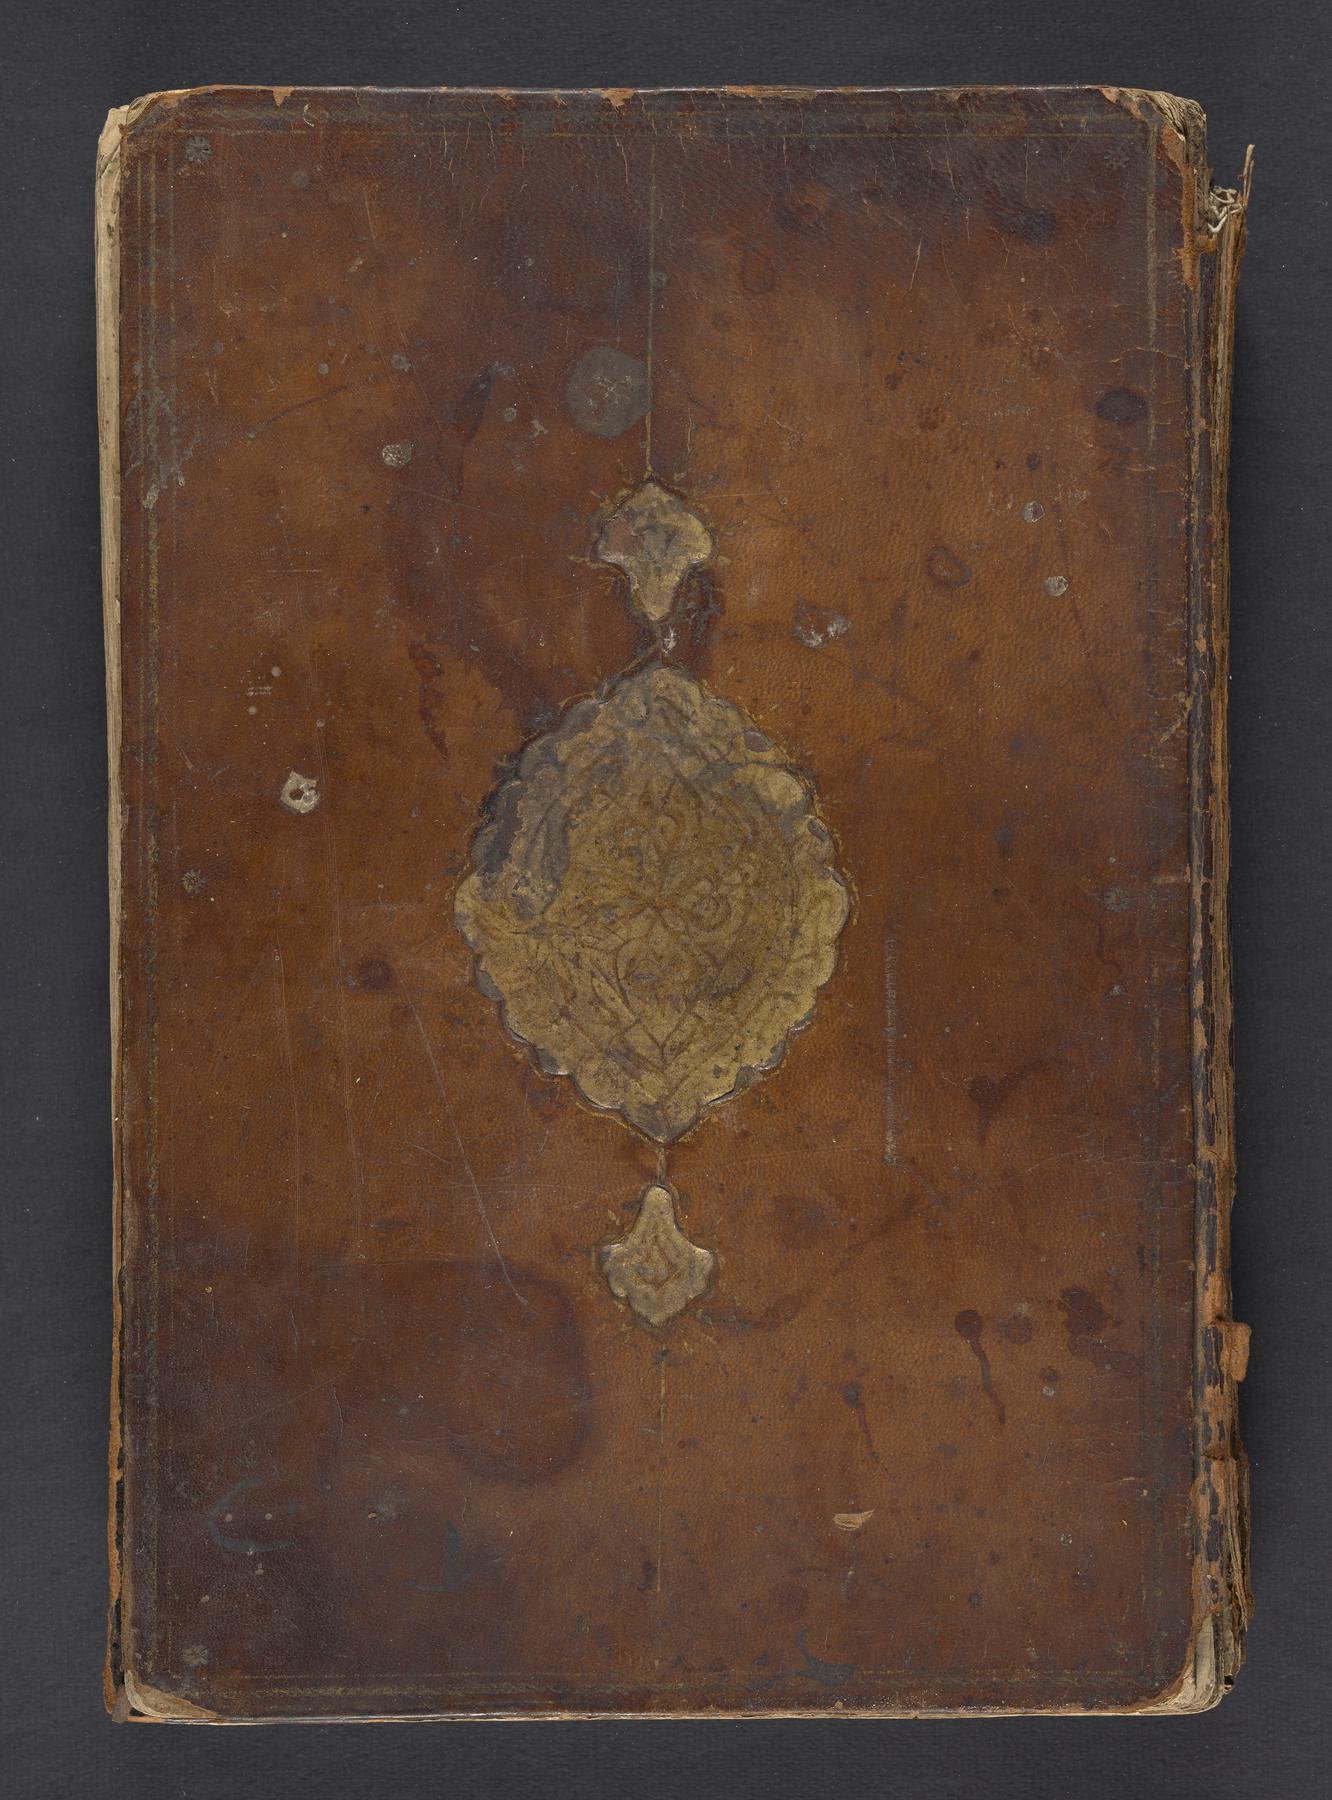 Cover of Ms. Codex 1896 with pendants and central mandorla